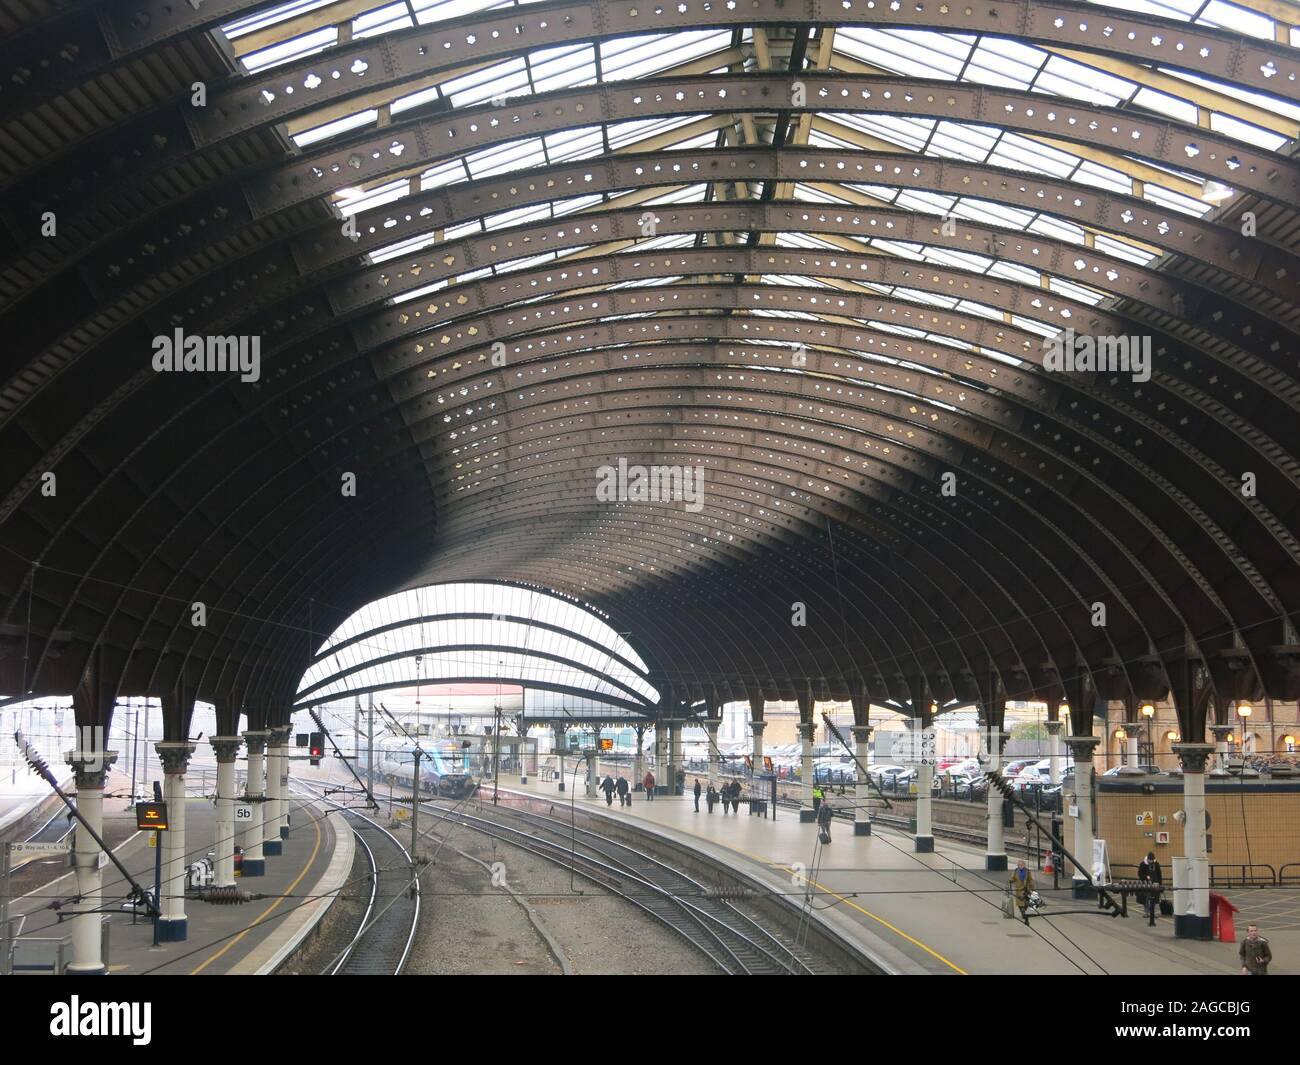 When it opened in 1877, York Railway Station was the largest in the world & admired for its curve; it is now a major stop on the East Coast Main Line. Stock Photo